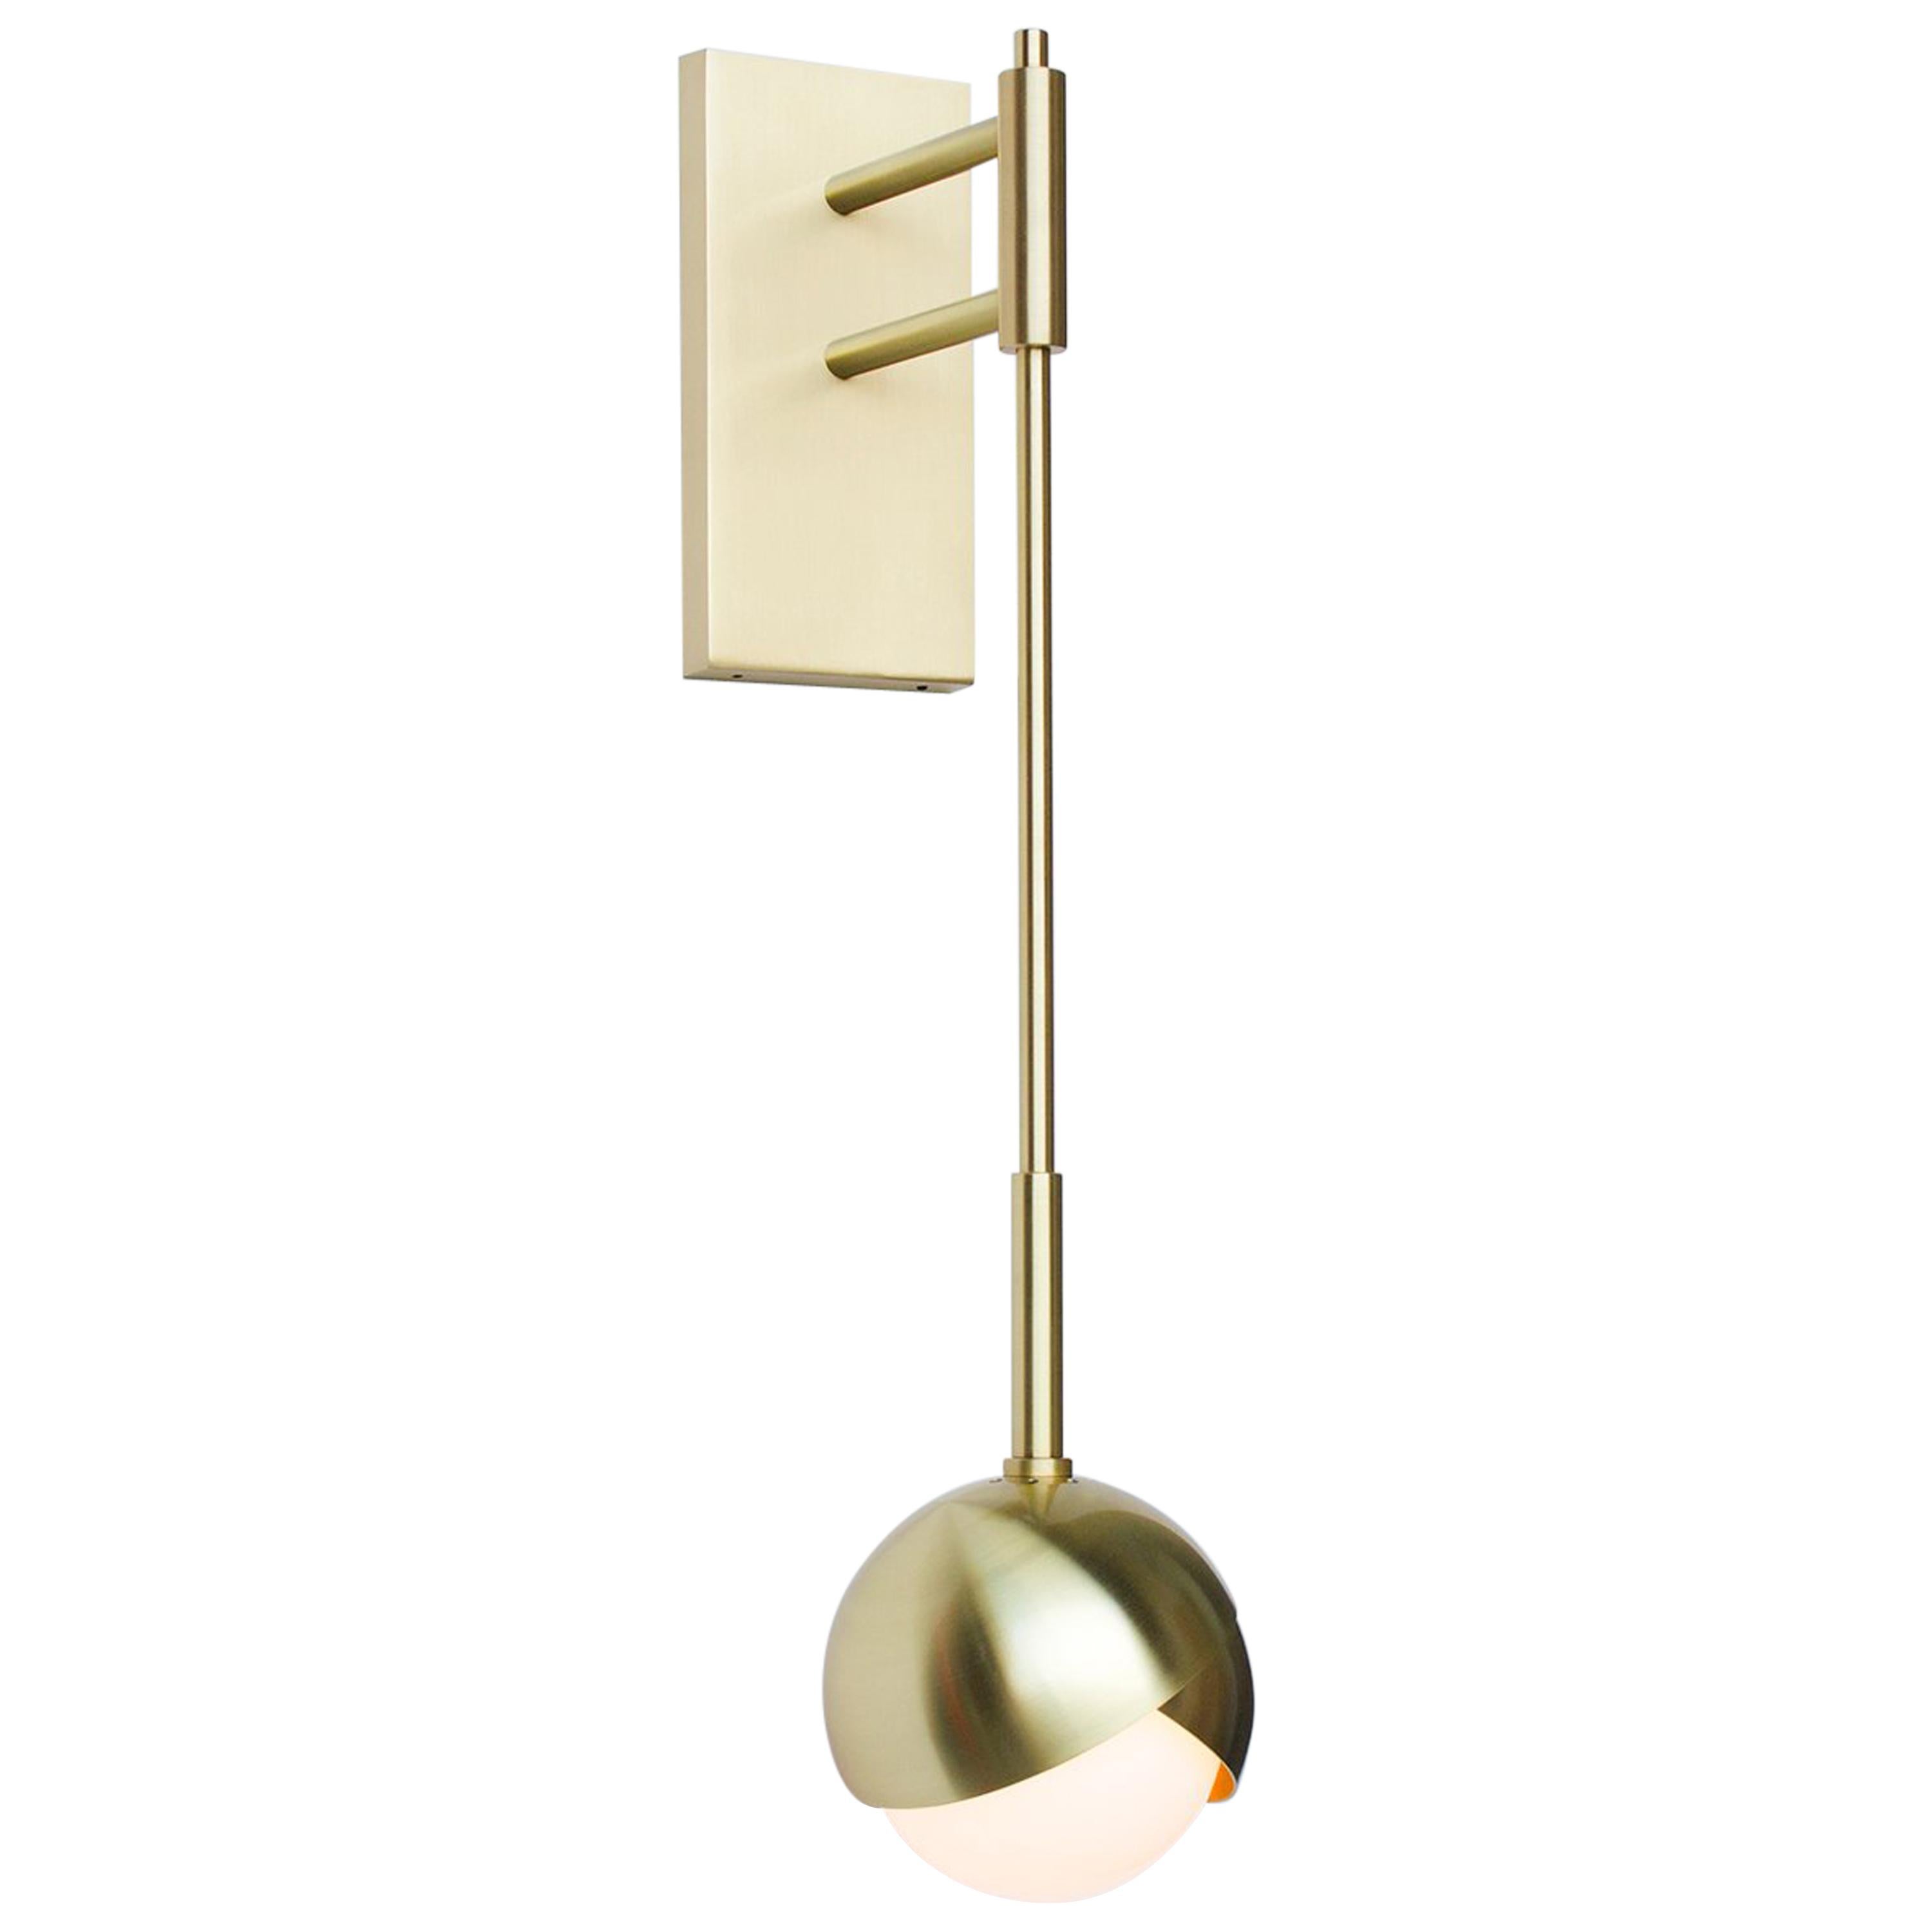 Benedict Truss Sconce in a Satin Brass Finish with White Opal Glass For Sale